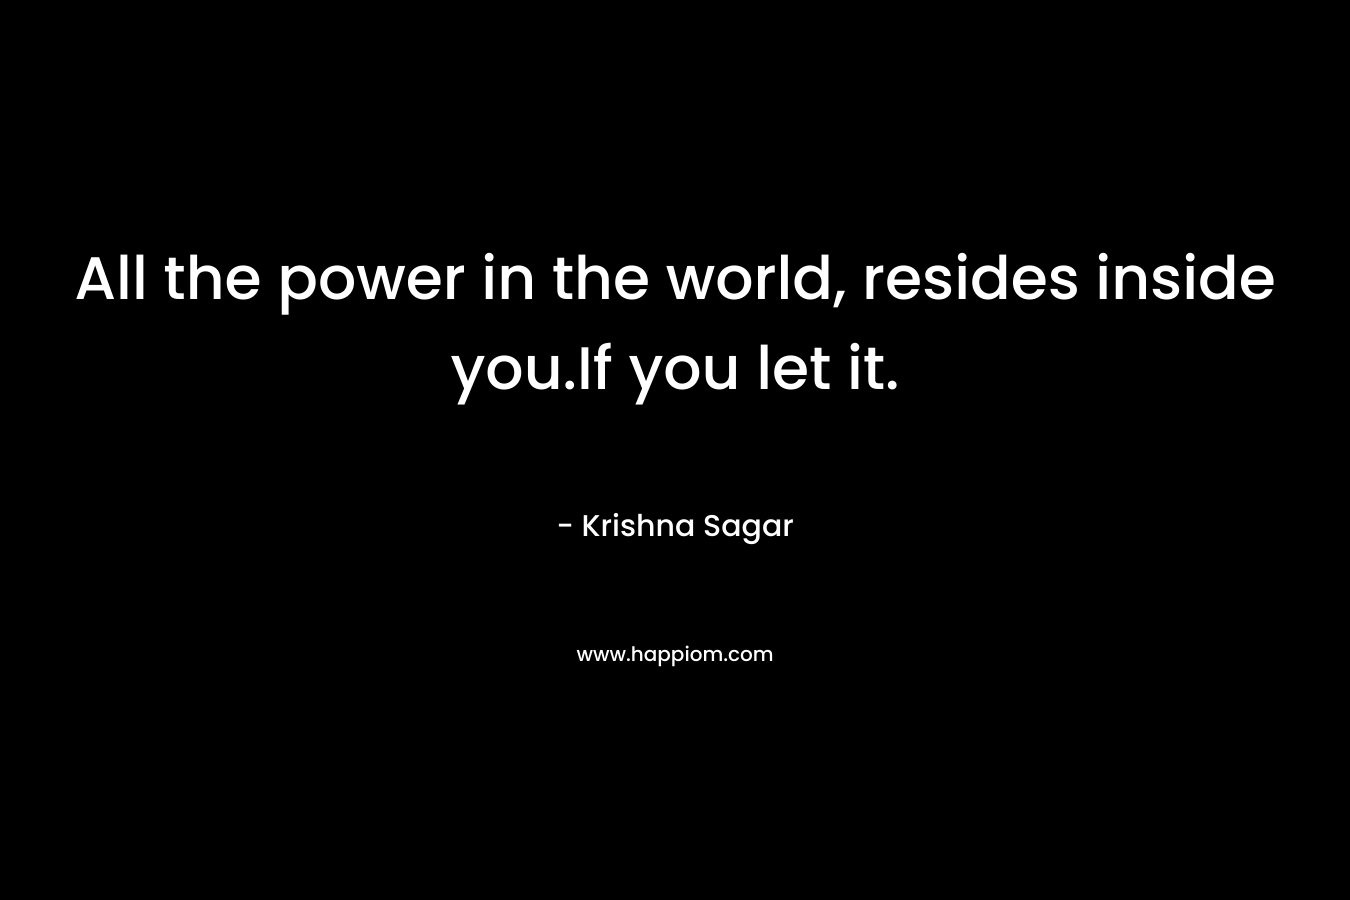 All the power in the world, resides inside you.If you let it.